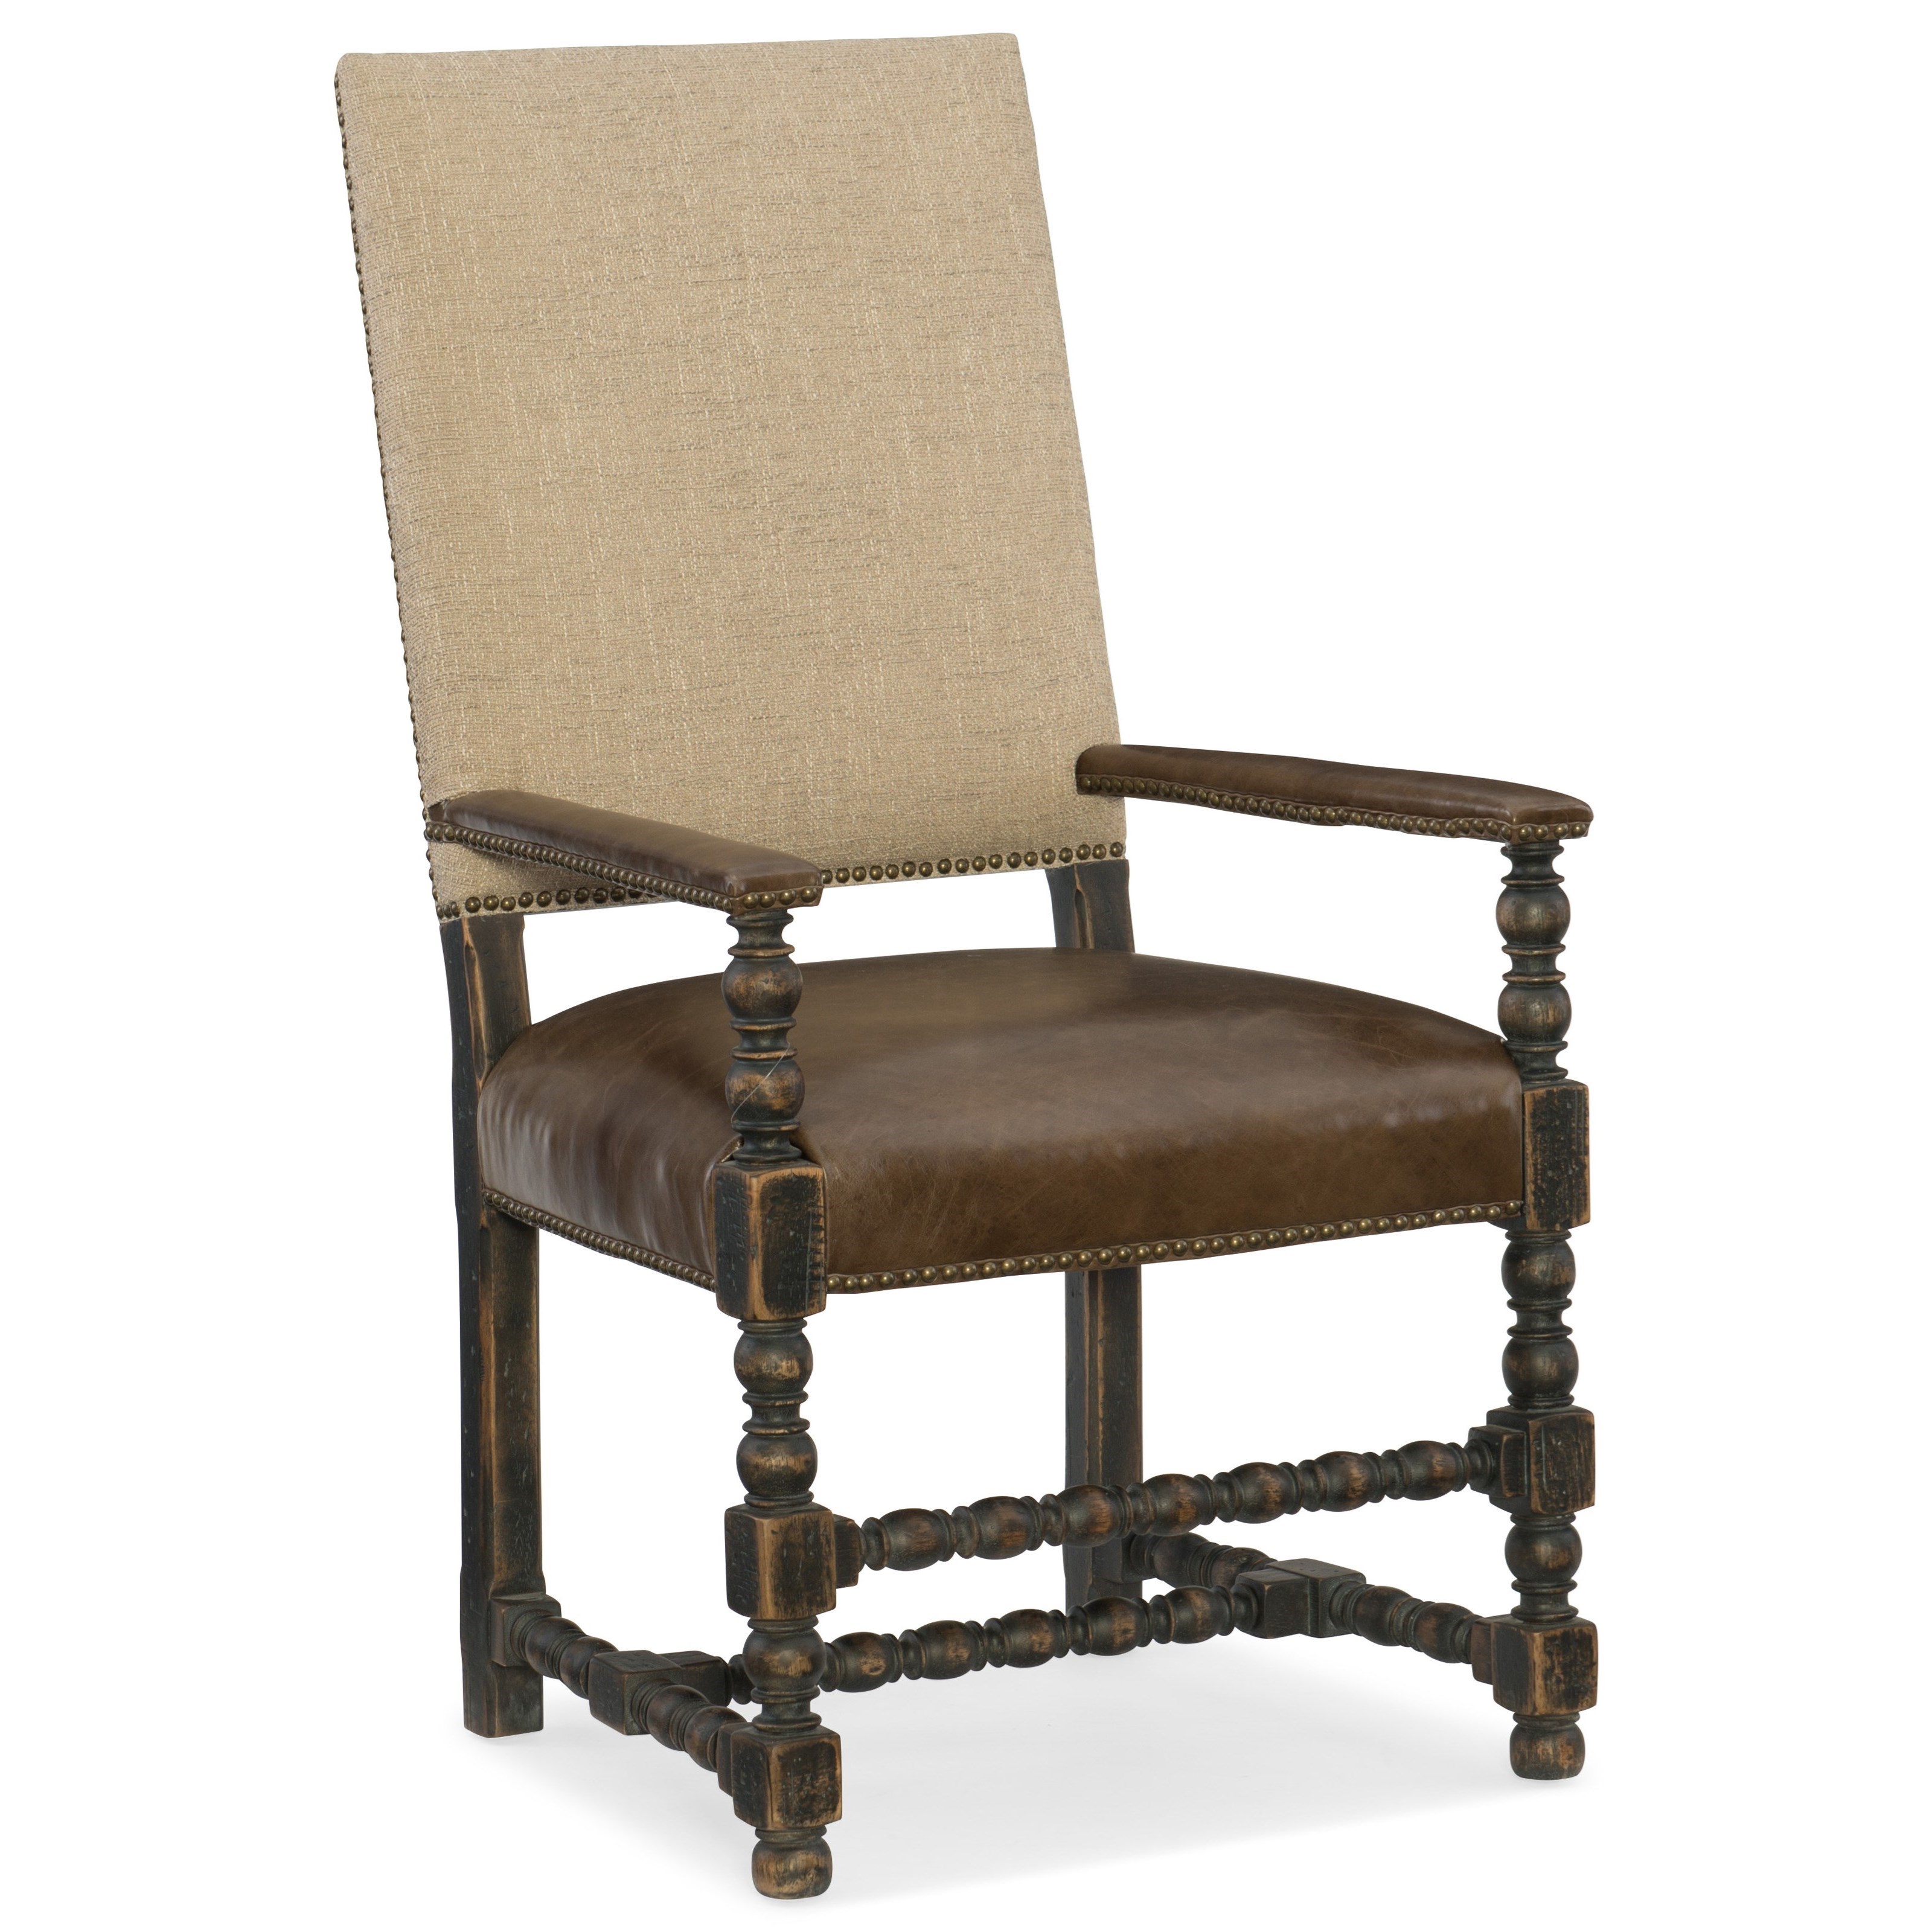 Comfort Upholstered Arm Chair with Leather Seat